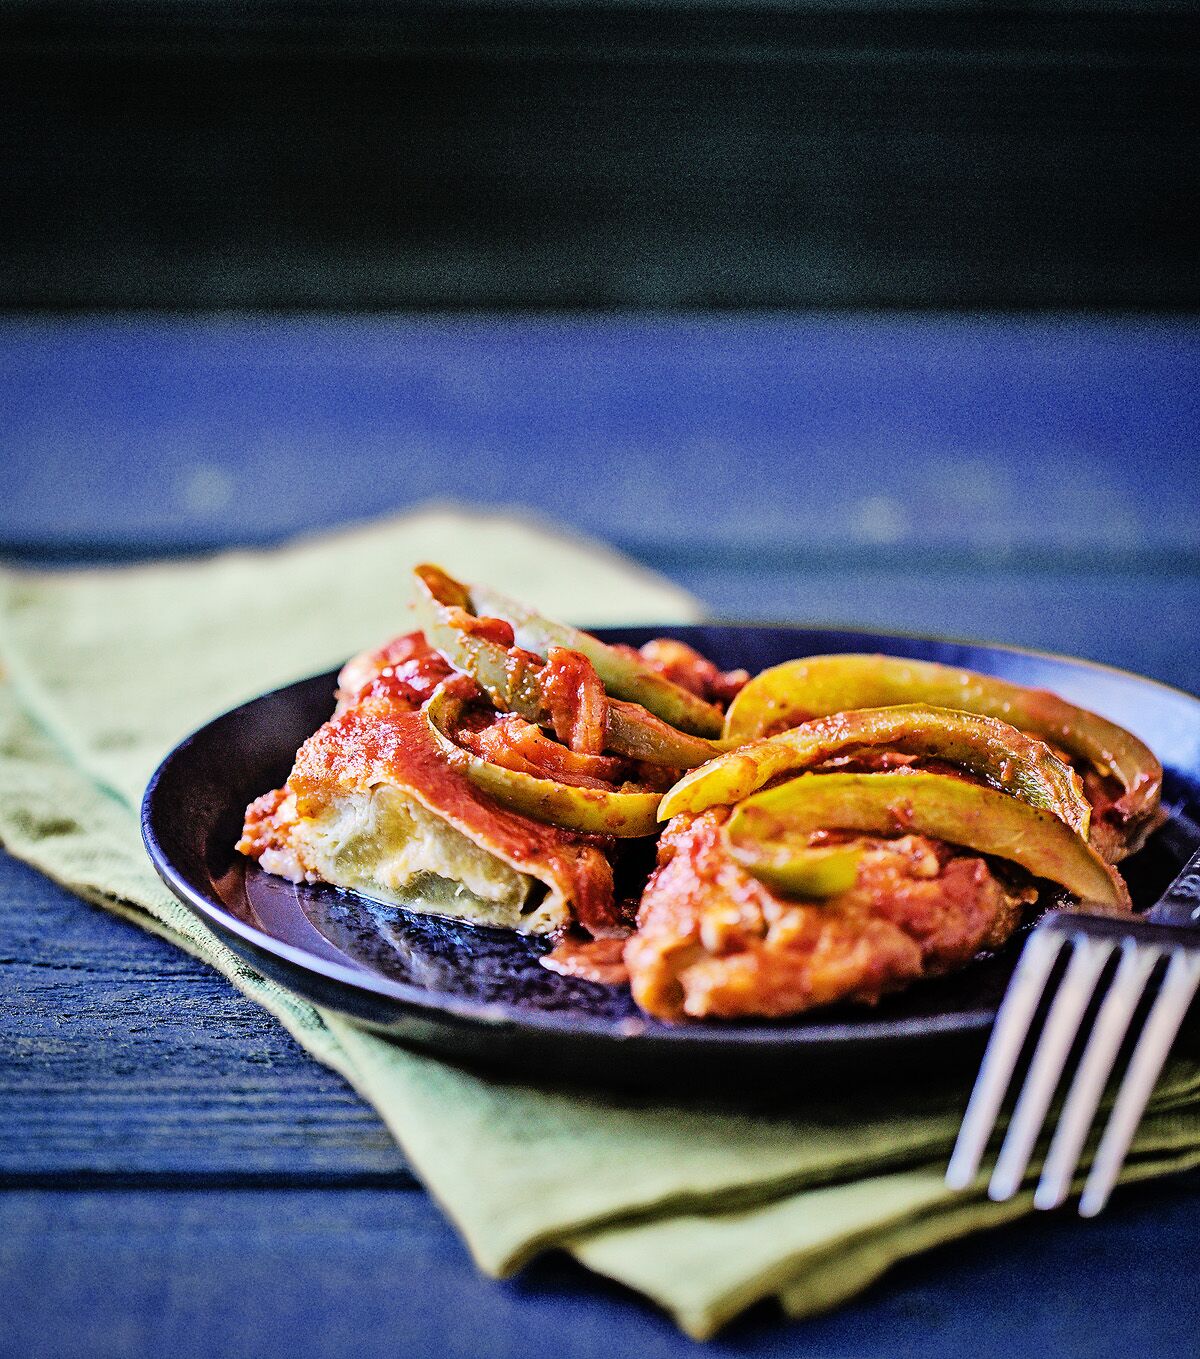 Chiles rellenos, Mexican cheese-stuffed peppers, covered in a tomato-based sauce with onions and bell peppers.